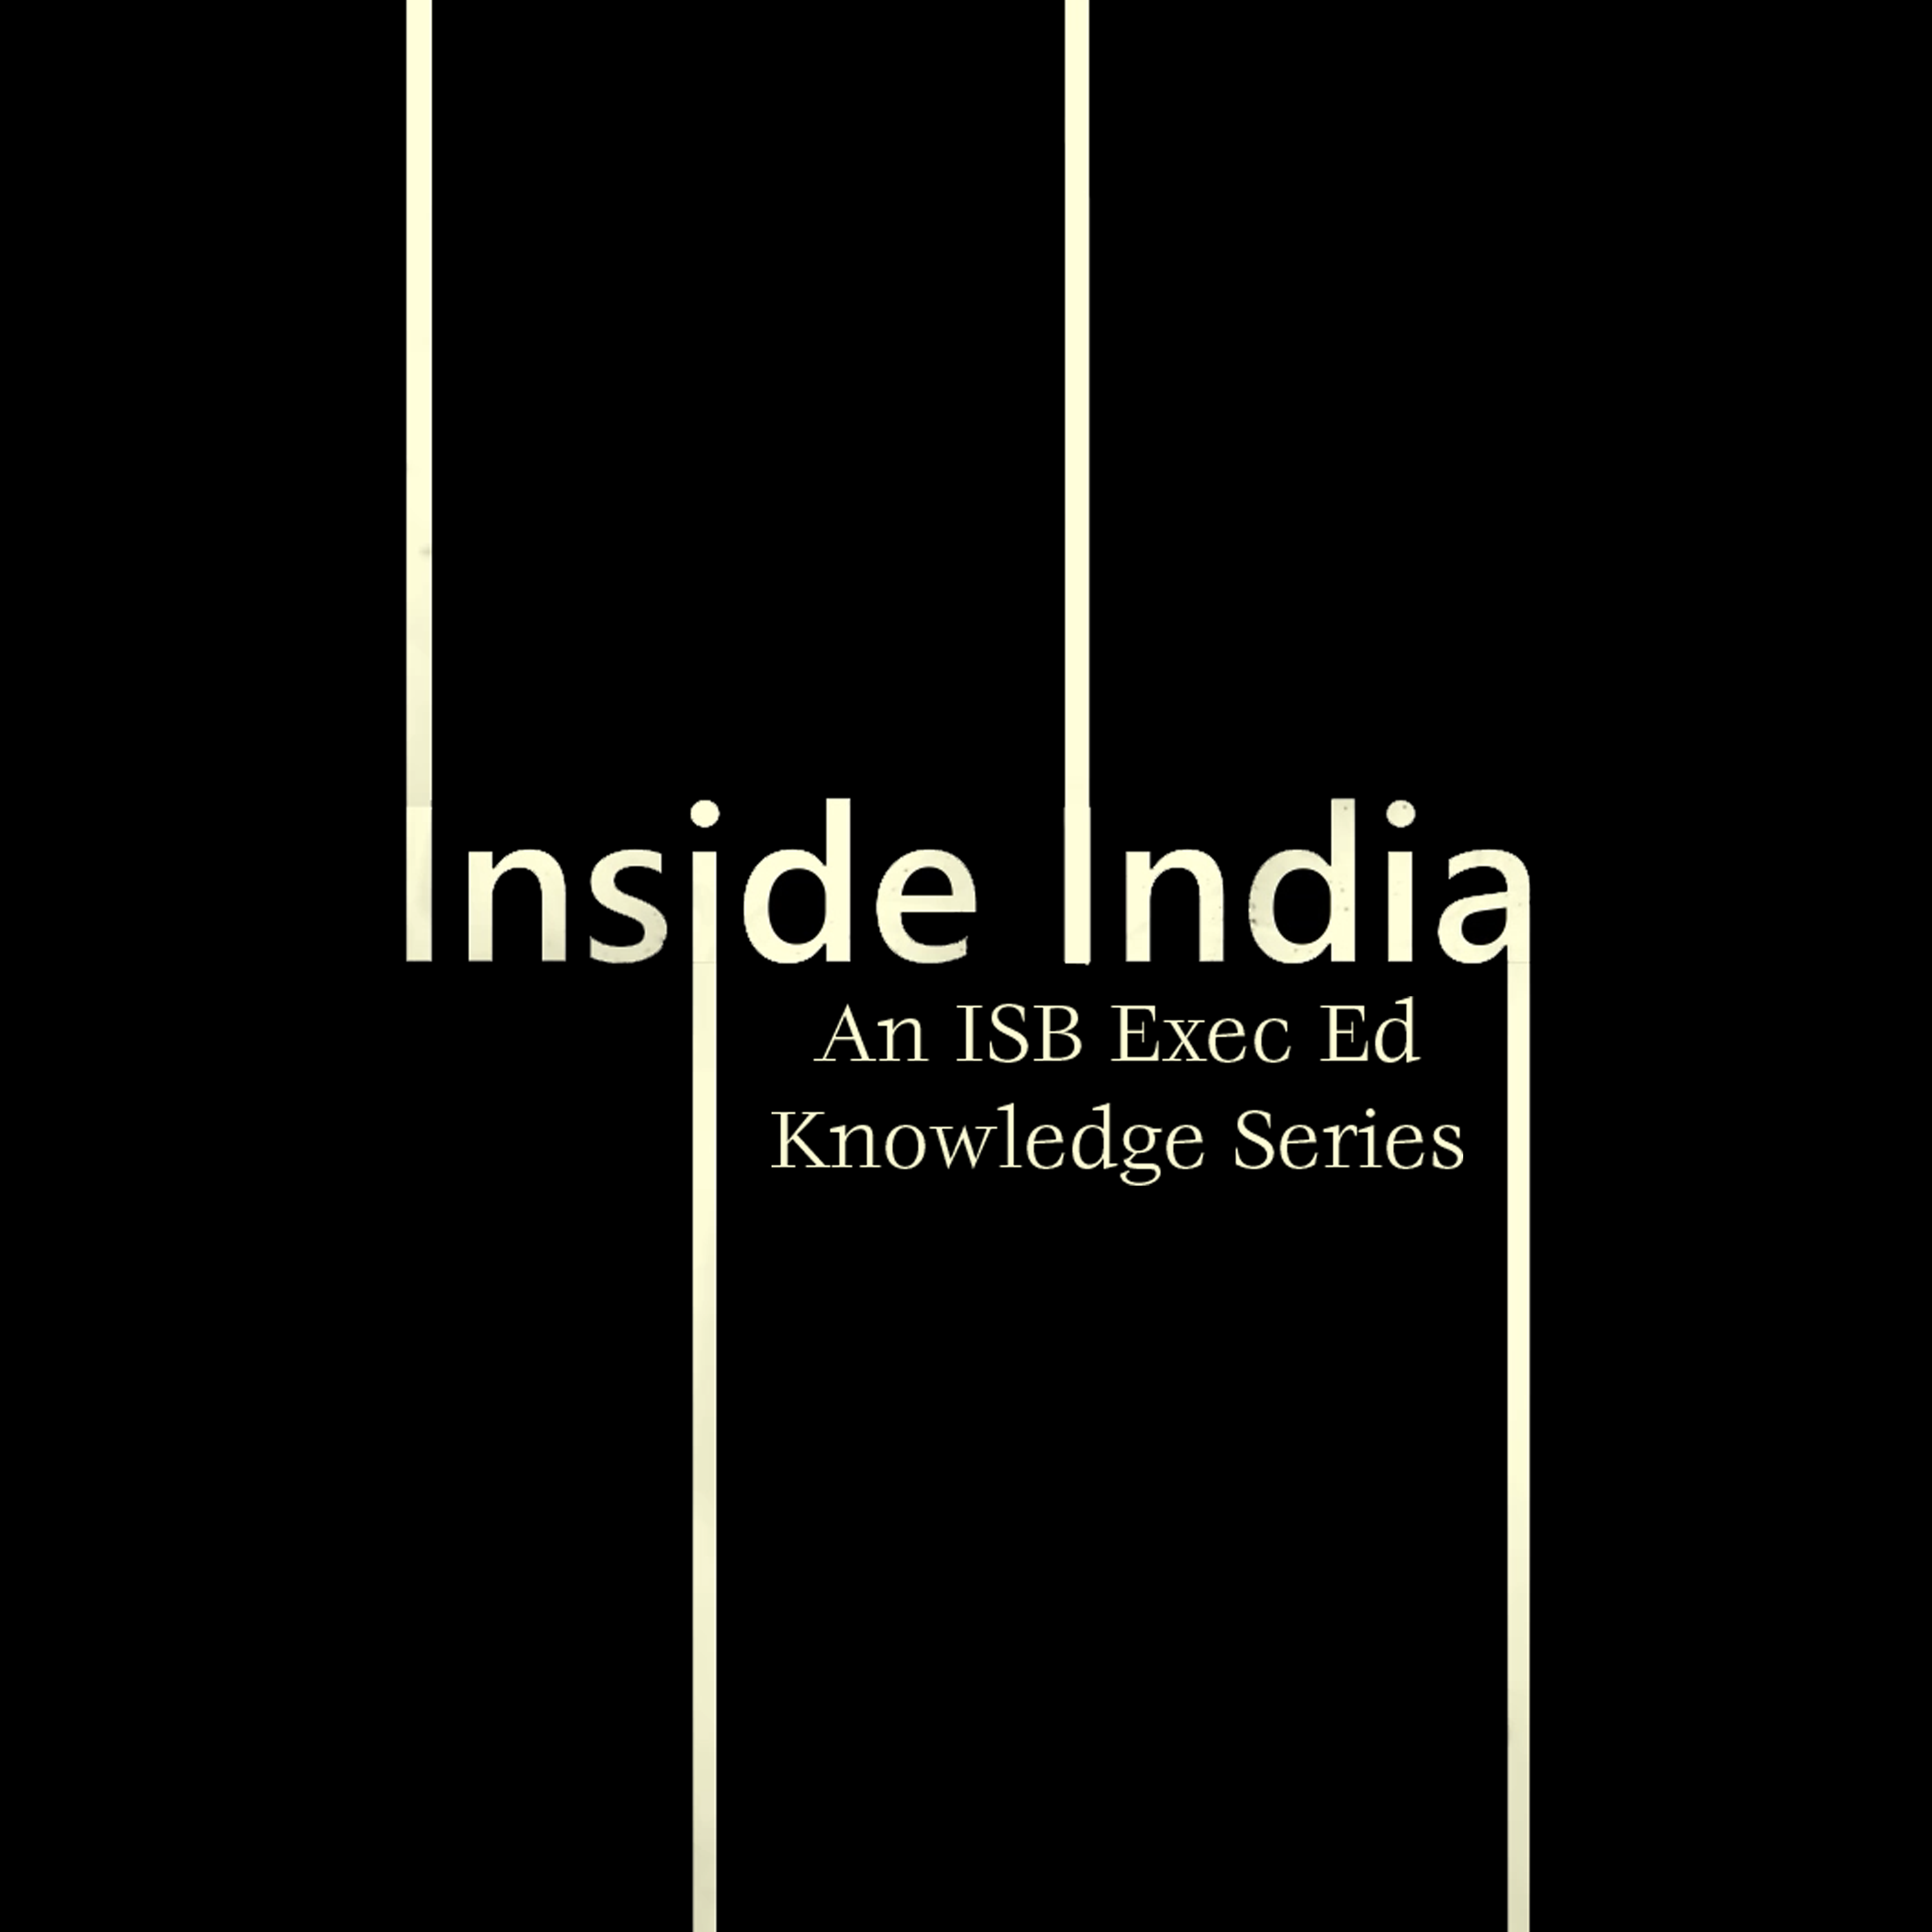 Artwork for Inside India by Indian School of Business (ISB)